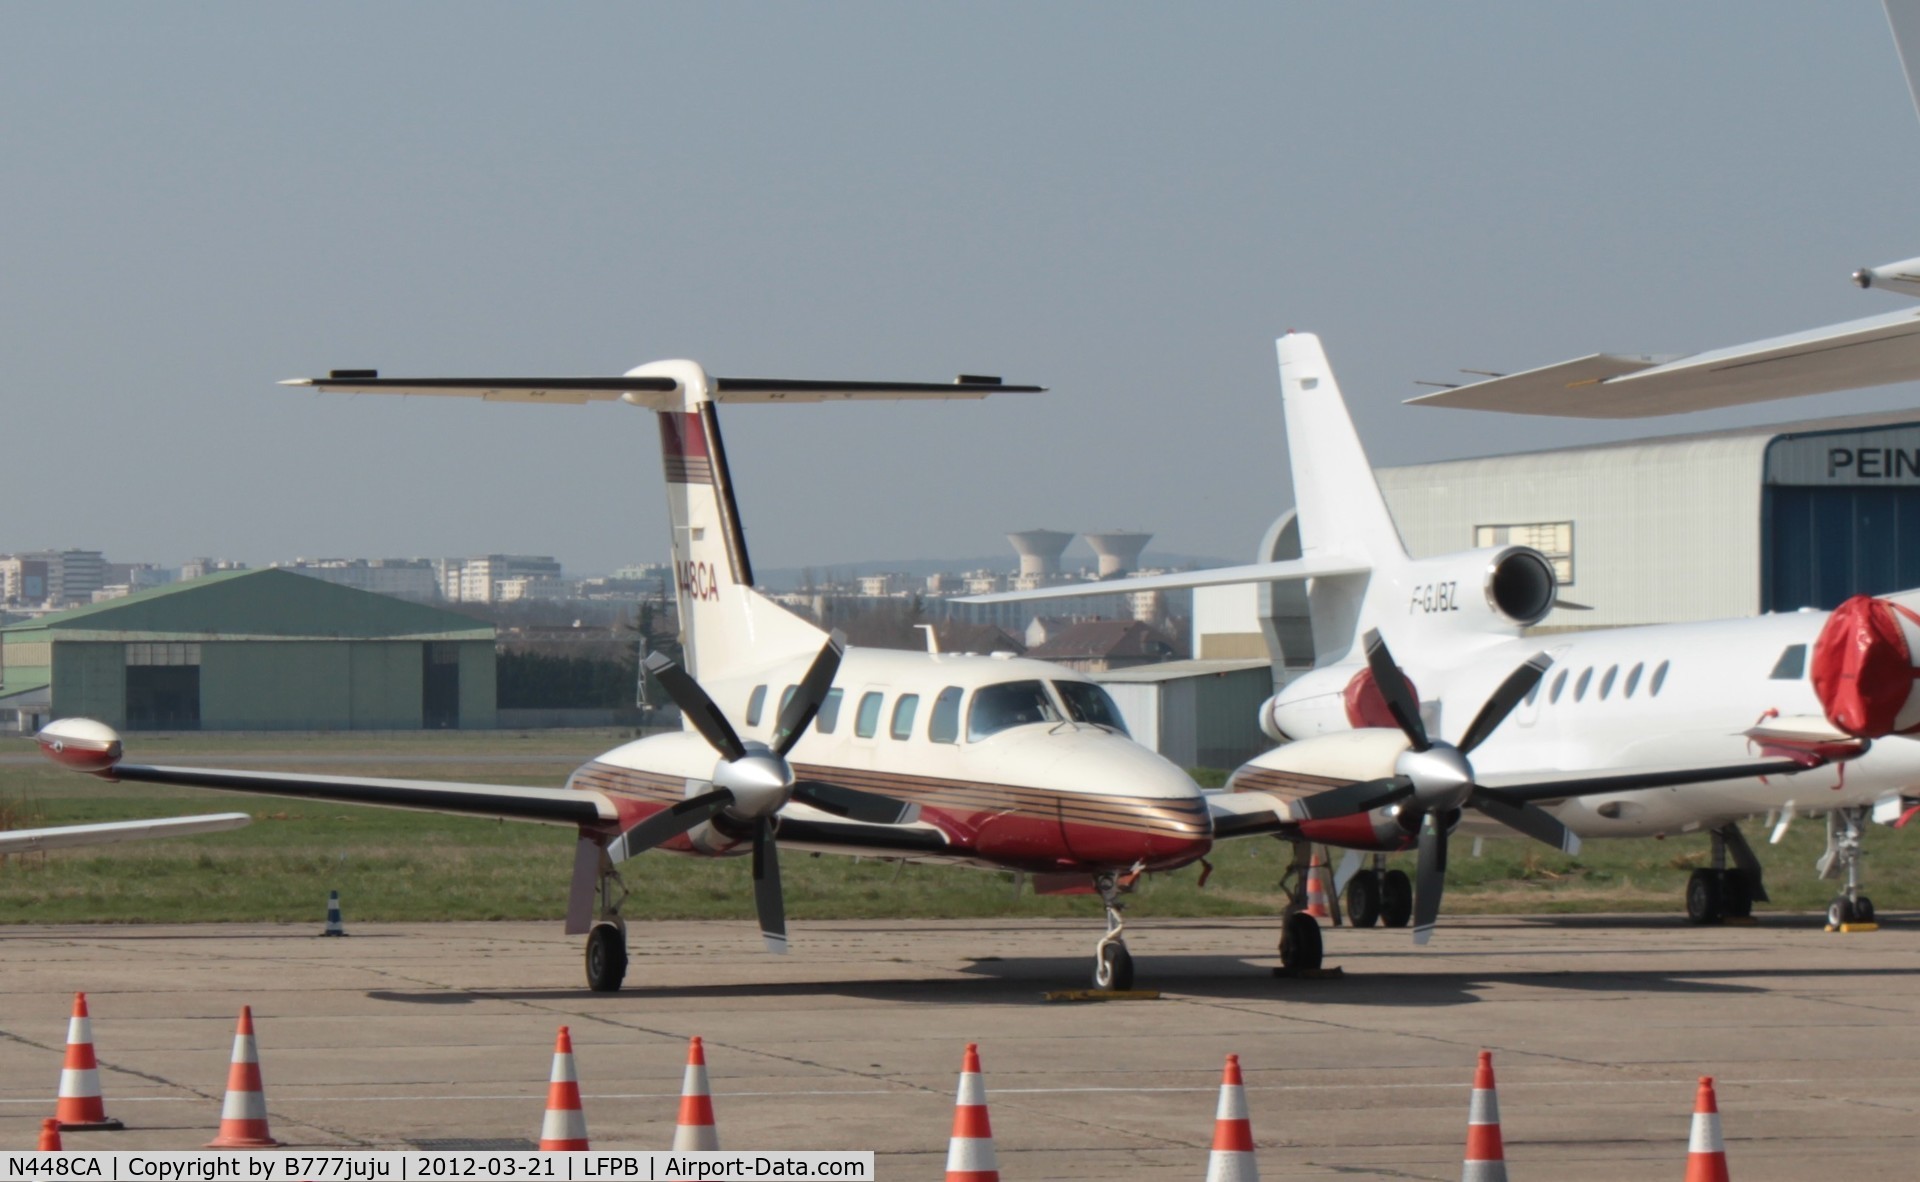 N448CA, 1986 Piper PA-42-1000 Cheyenne 400LS C/N 42-5527034, with new 5 blace propler